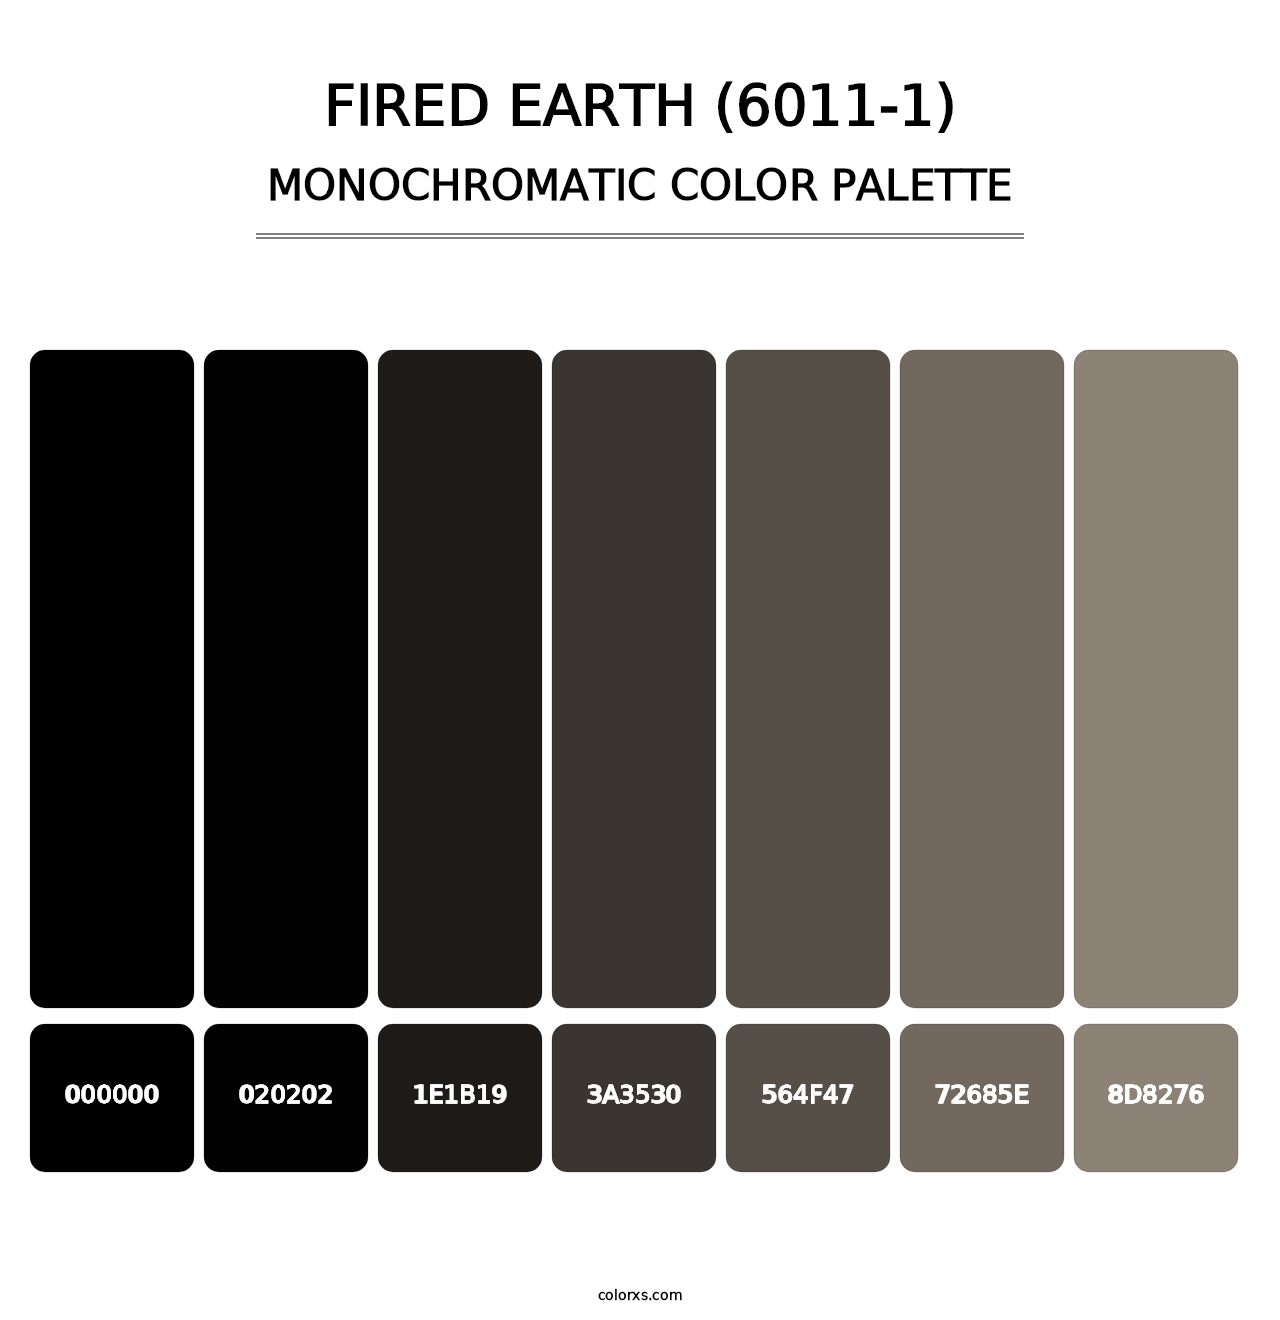 Fired Earth (6011-1) - Monochromatic Color Palette